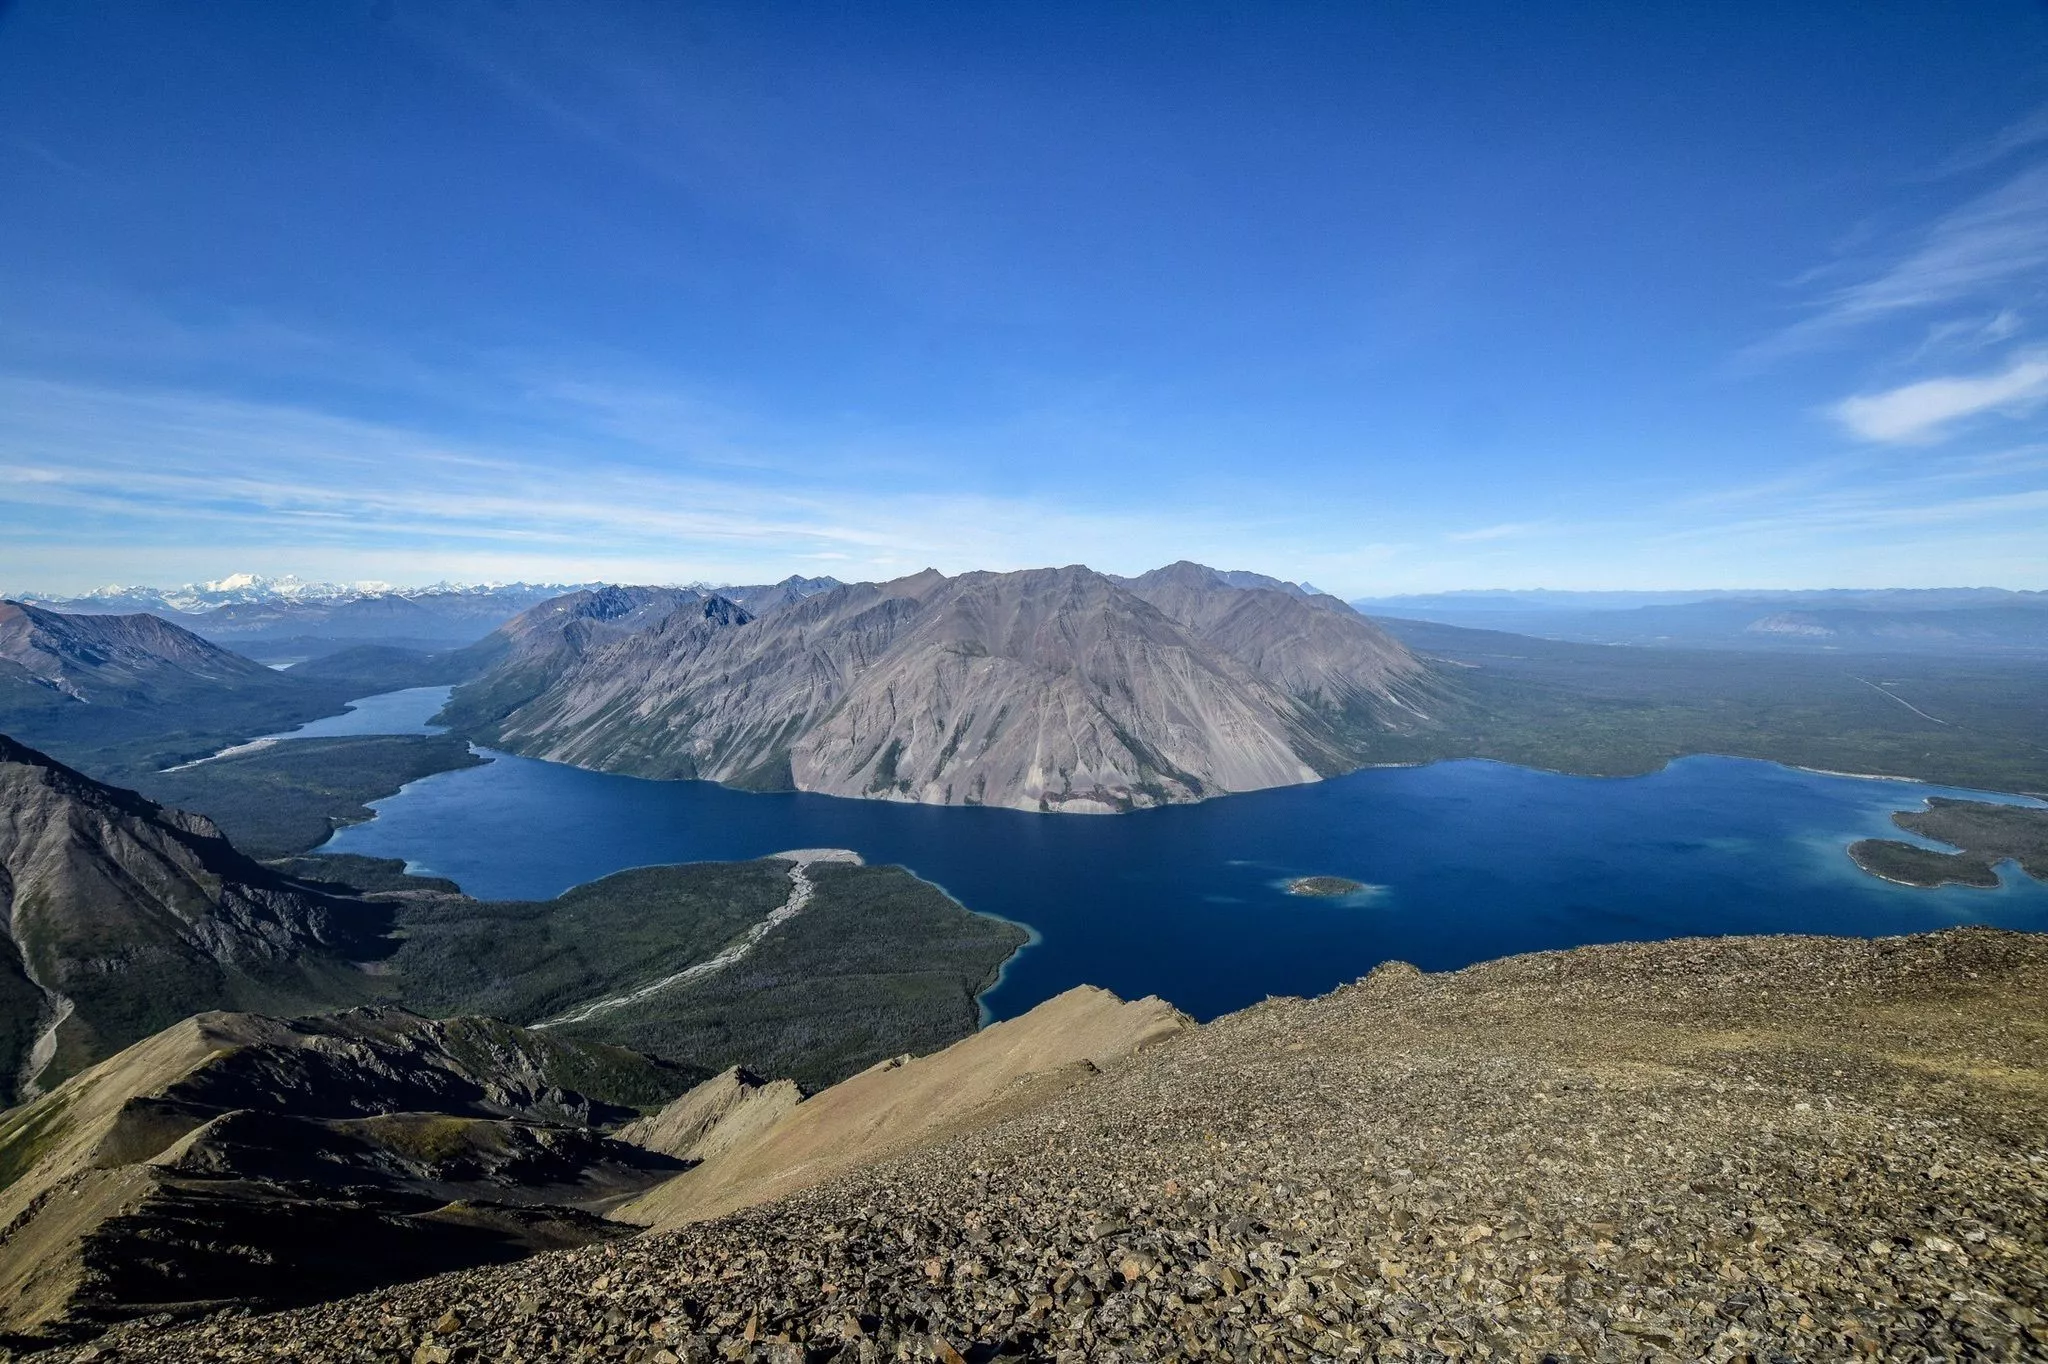 King's Throne Trail in Canada, North America | Trekking & Hiking - Rated 0.8